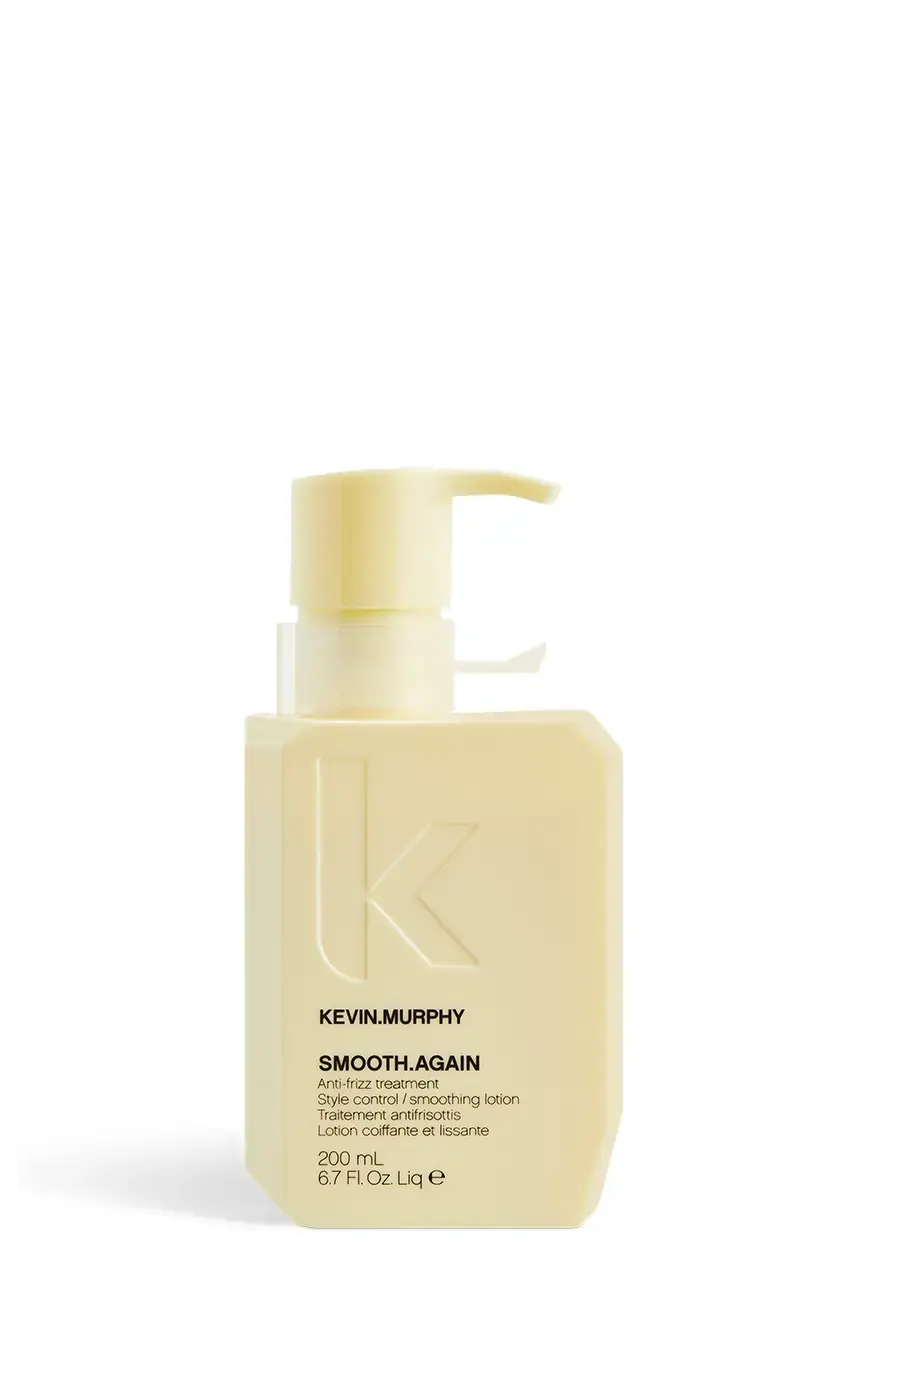 KEVIN.MURPHY Smooth.Again